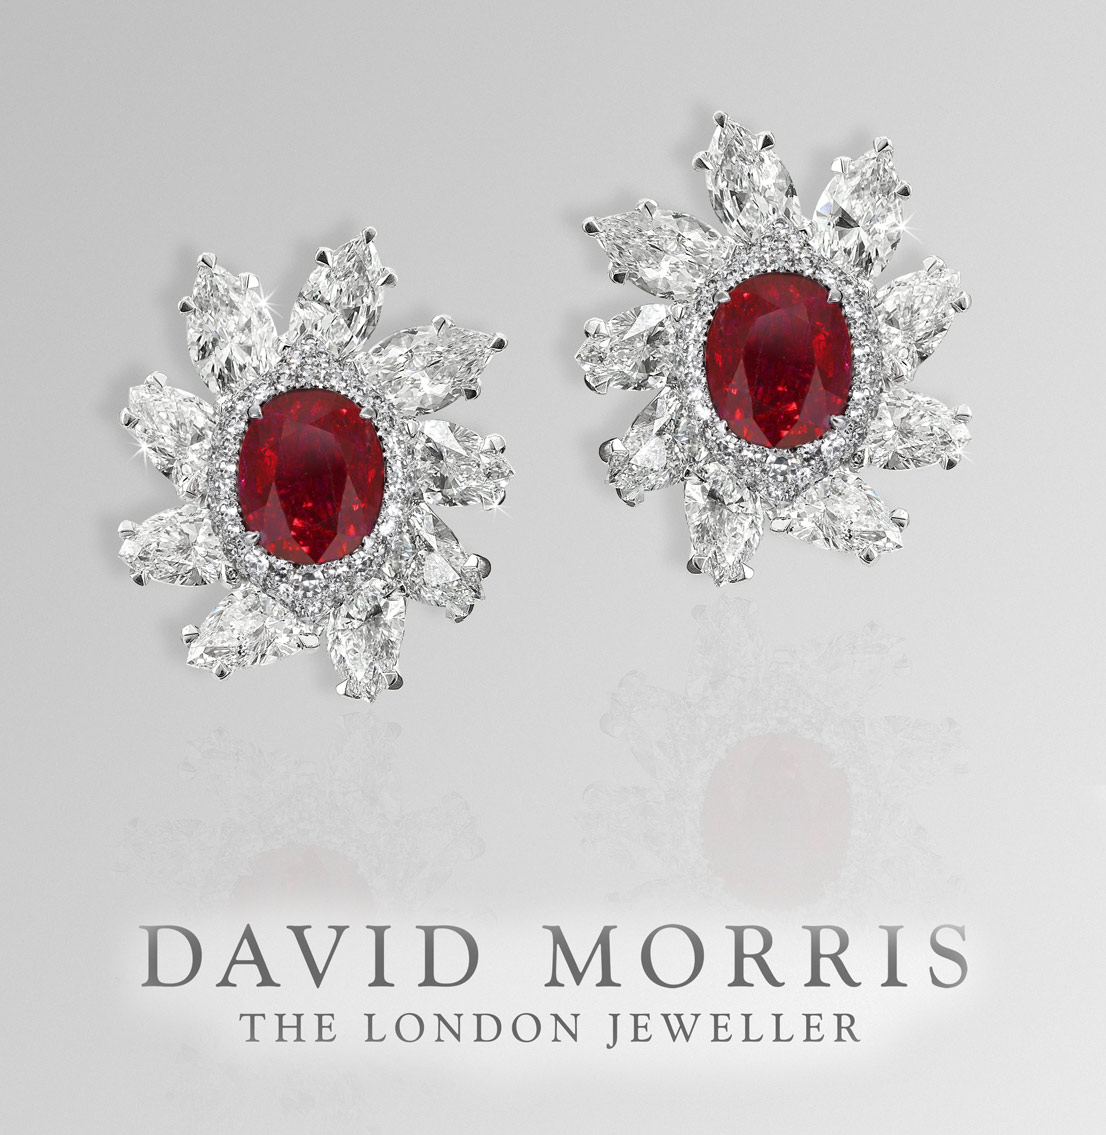 David Morris Pigeon blood Ruby earrings, 5.09ct and 5.02cts each with no heat treatment. Rubies are surrounded by pear-shaped diamonds and set in 18ct white gold